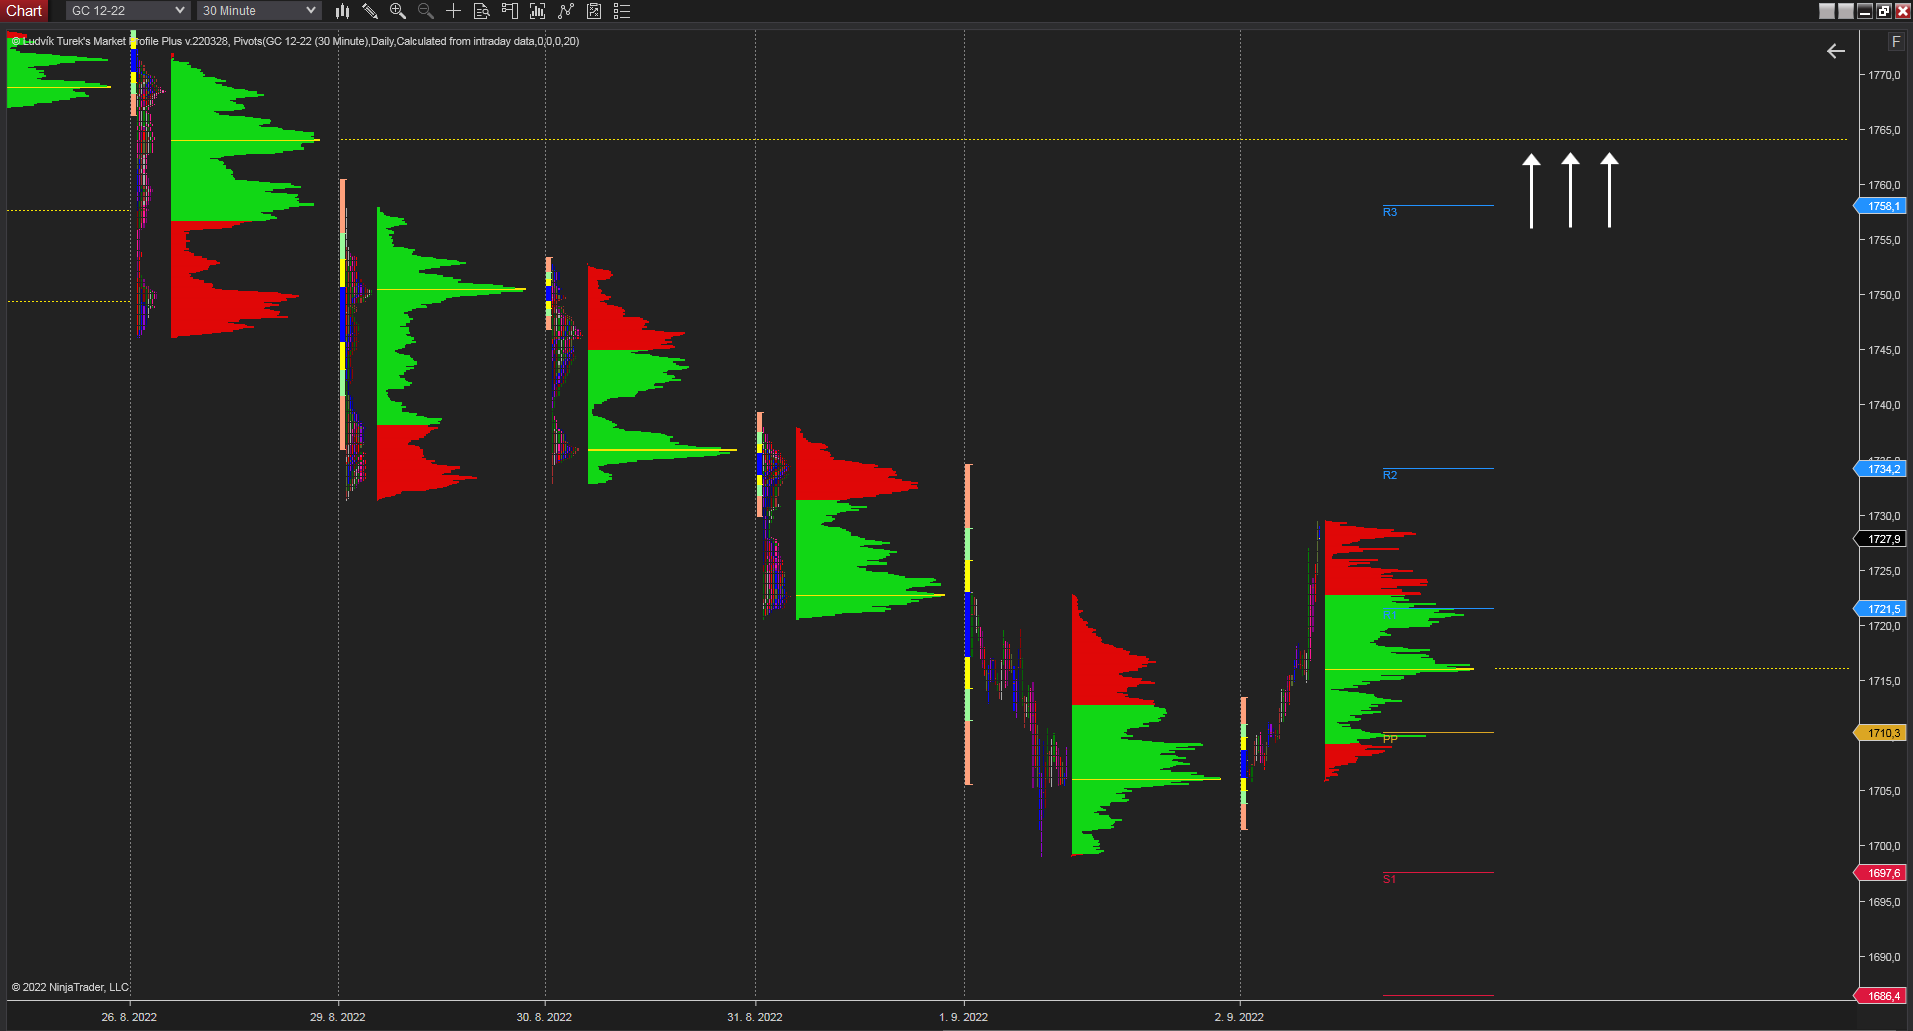 30 minutes chart of GC (Gold Futures), Daily Market Profile. Source: Author's analysis